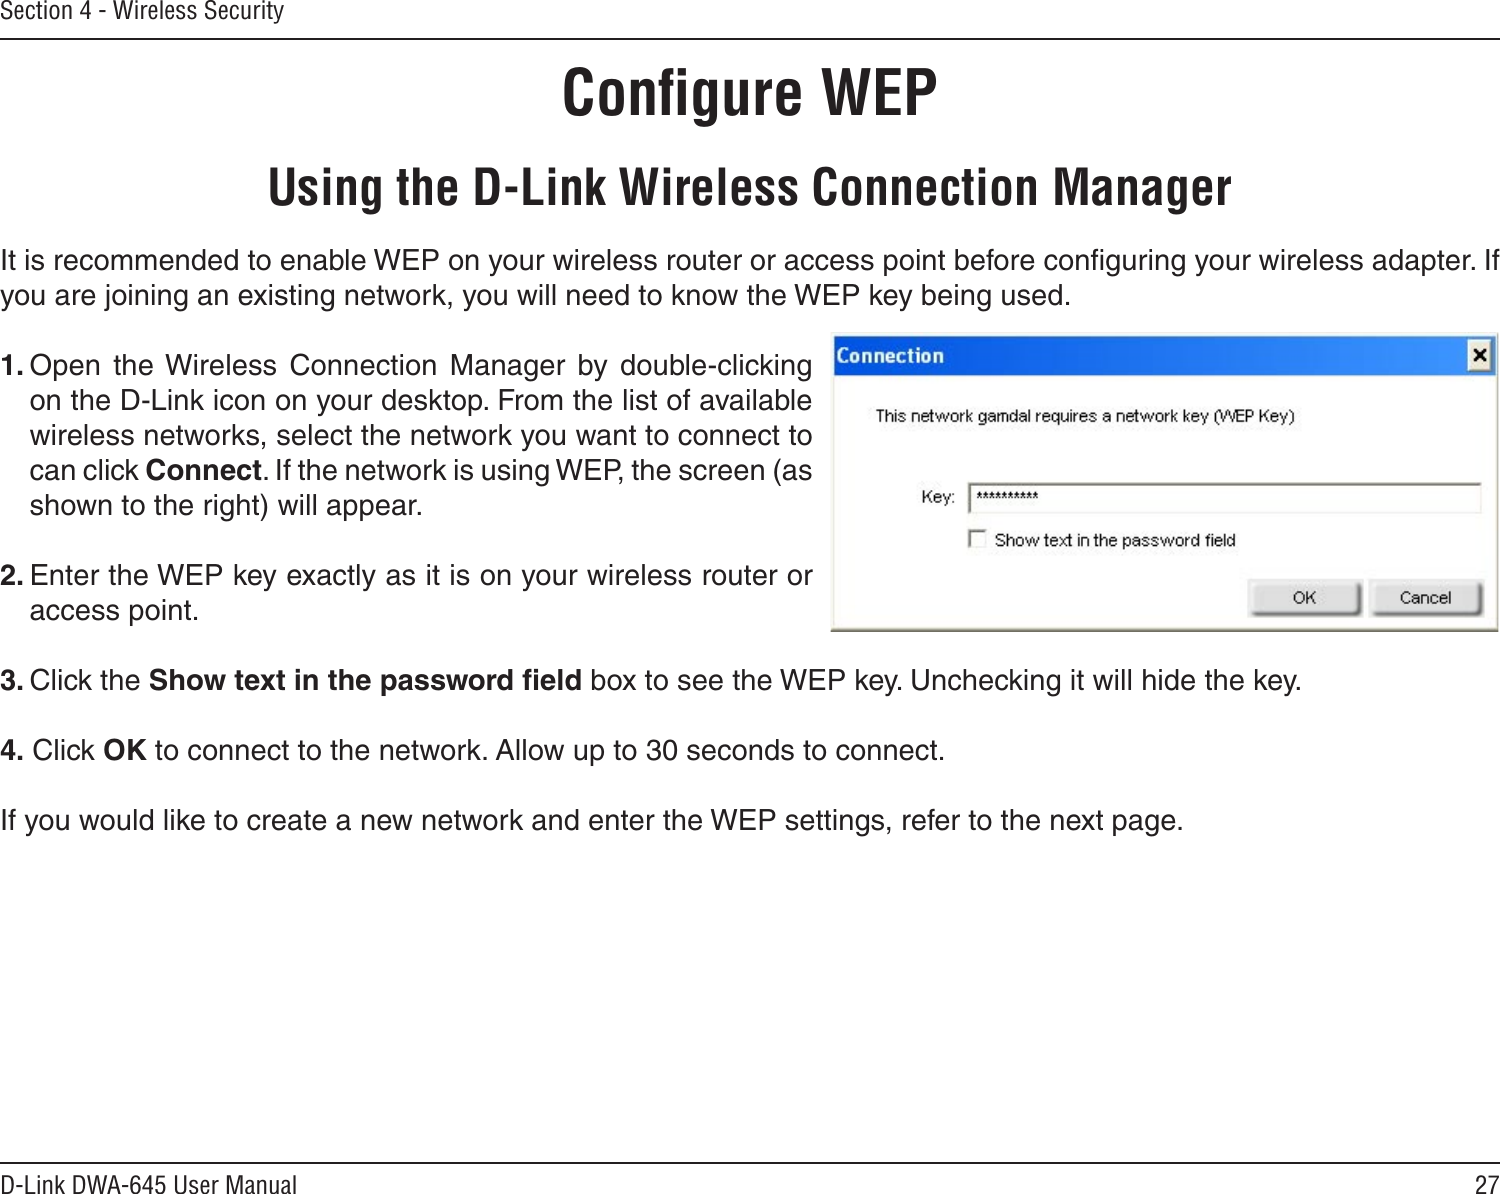 27D-Link DWA-645 User ManualSection 4 - Wireless SecurityConﬁgure WEPUsing the D-Link Wireless Connection ManagerIt is recommended to enable WEP on your wireless router or access point before conﬁguring your wireless adapter. If you are joining an existing network, you will need to know the WEP key being used.1. Open  the Wireless  Connection  Manager  by  double-clicking on the D-Link icon on your desktop. From the list of available wireless networks, select the network you want to connect to can click Connect. If the network is using WEP, the screen (as shown to the right) will appear. 2. Enter the WEP key exactly as it is on your wireless router or access point.3. Click the Show text in the password ﬁeld box to see the WEP key. Unchecking it will hide the key.4. Click OK to connect to the network. Allow up to 30 seconds to connect. If you would like to create a new network and enter the WEP settings, refer to the next page.